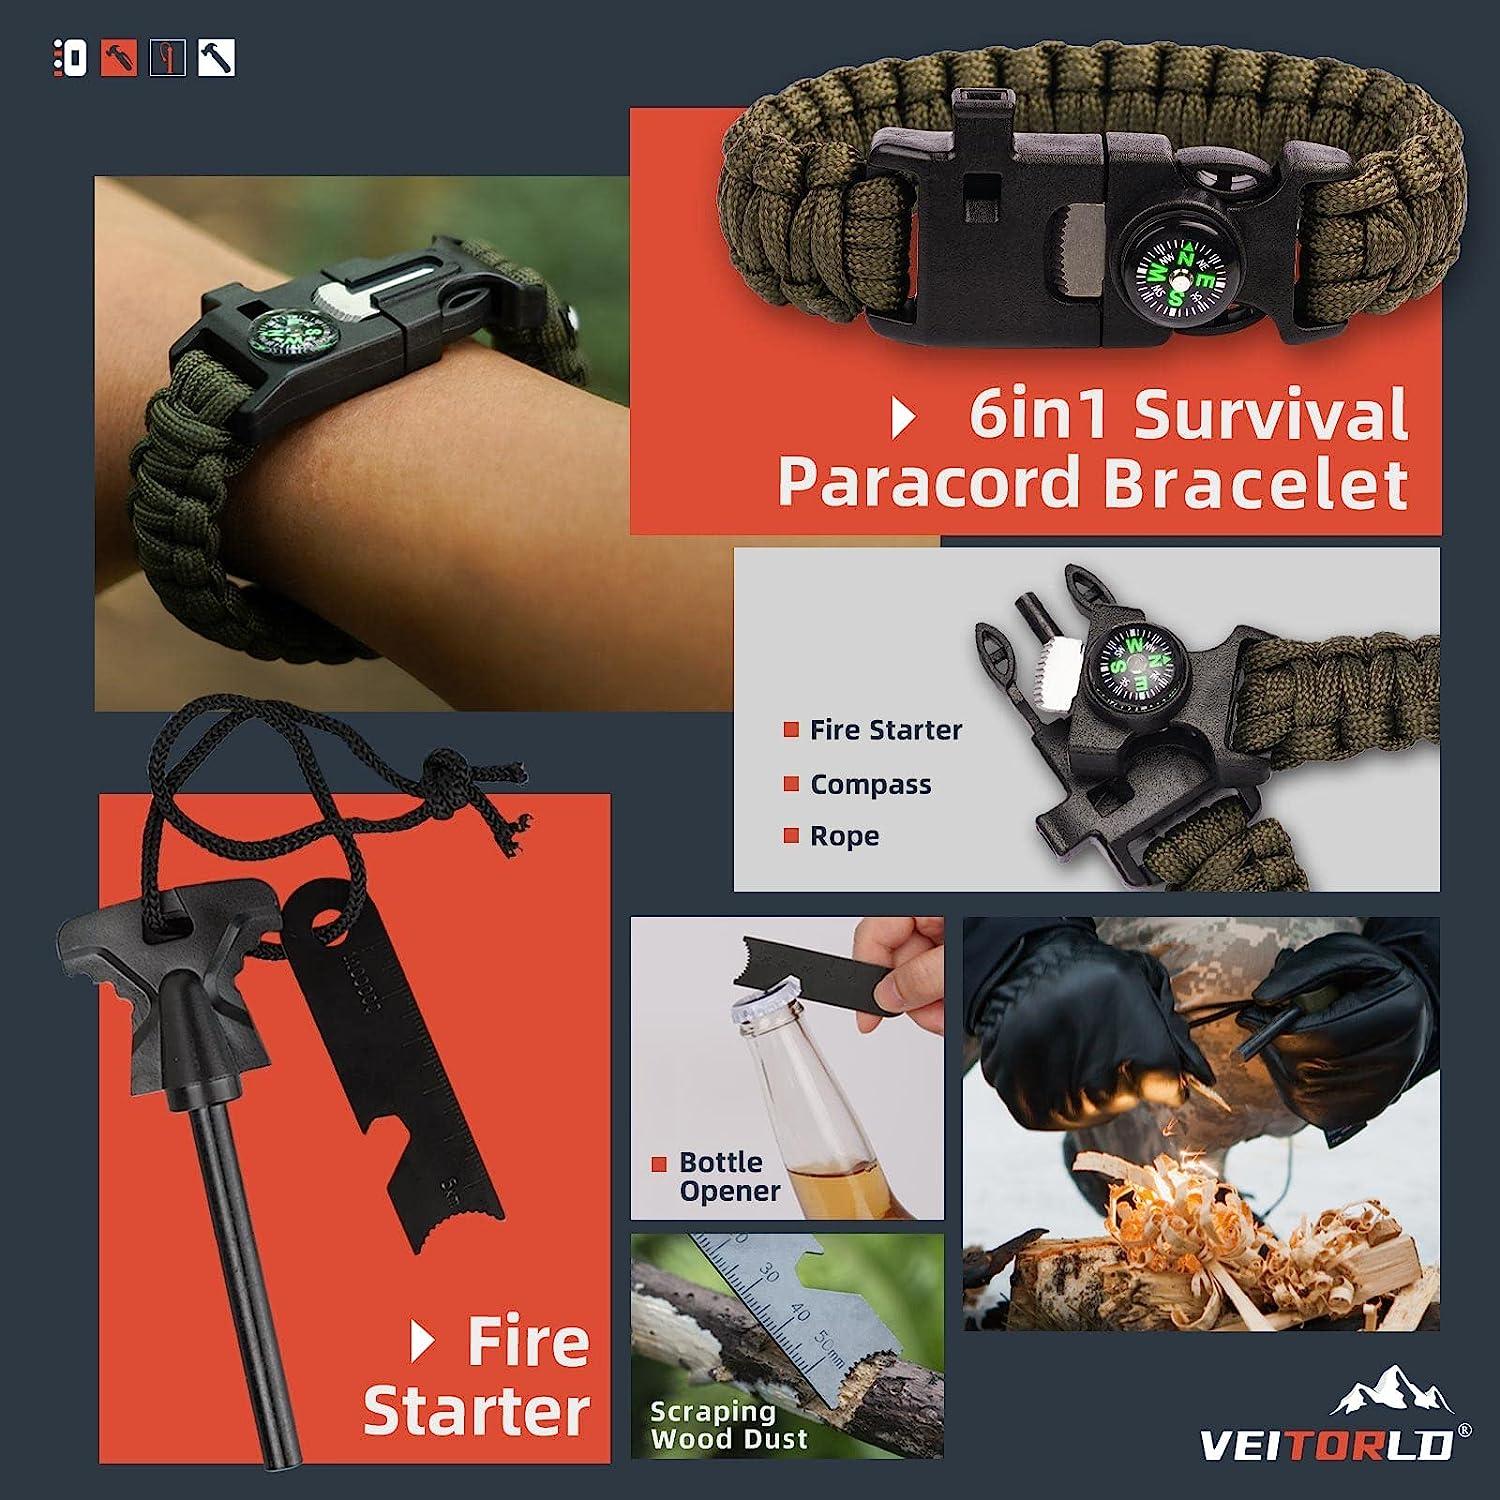 VEITORLD Gifts for Men Dad Husband Him, Fathers Day, Survival Gear and  Equipment 12 in 1, Survival Kits, Cool Unique Fishing Hunting Birthday Gifts  for Him Teen Boy Boyfriend Women 12 in 1 Survival Kit